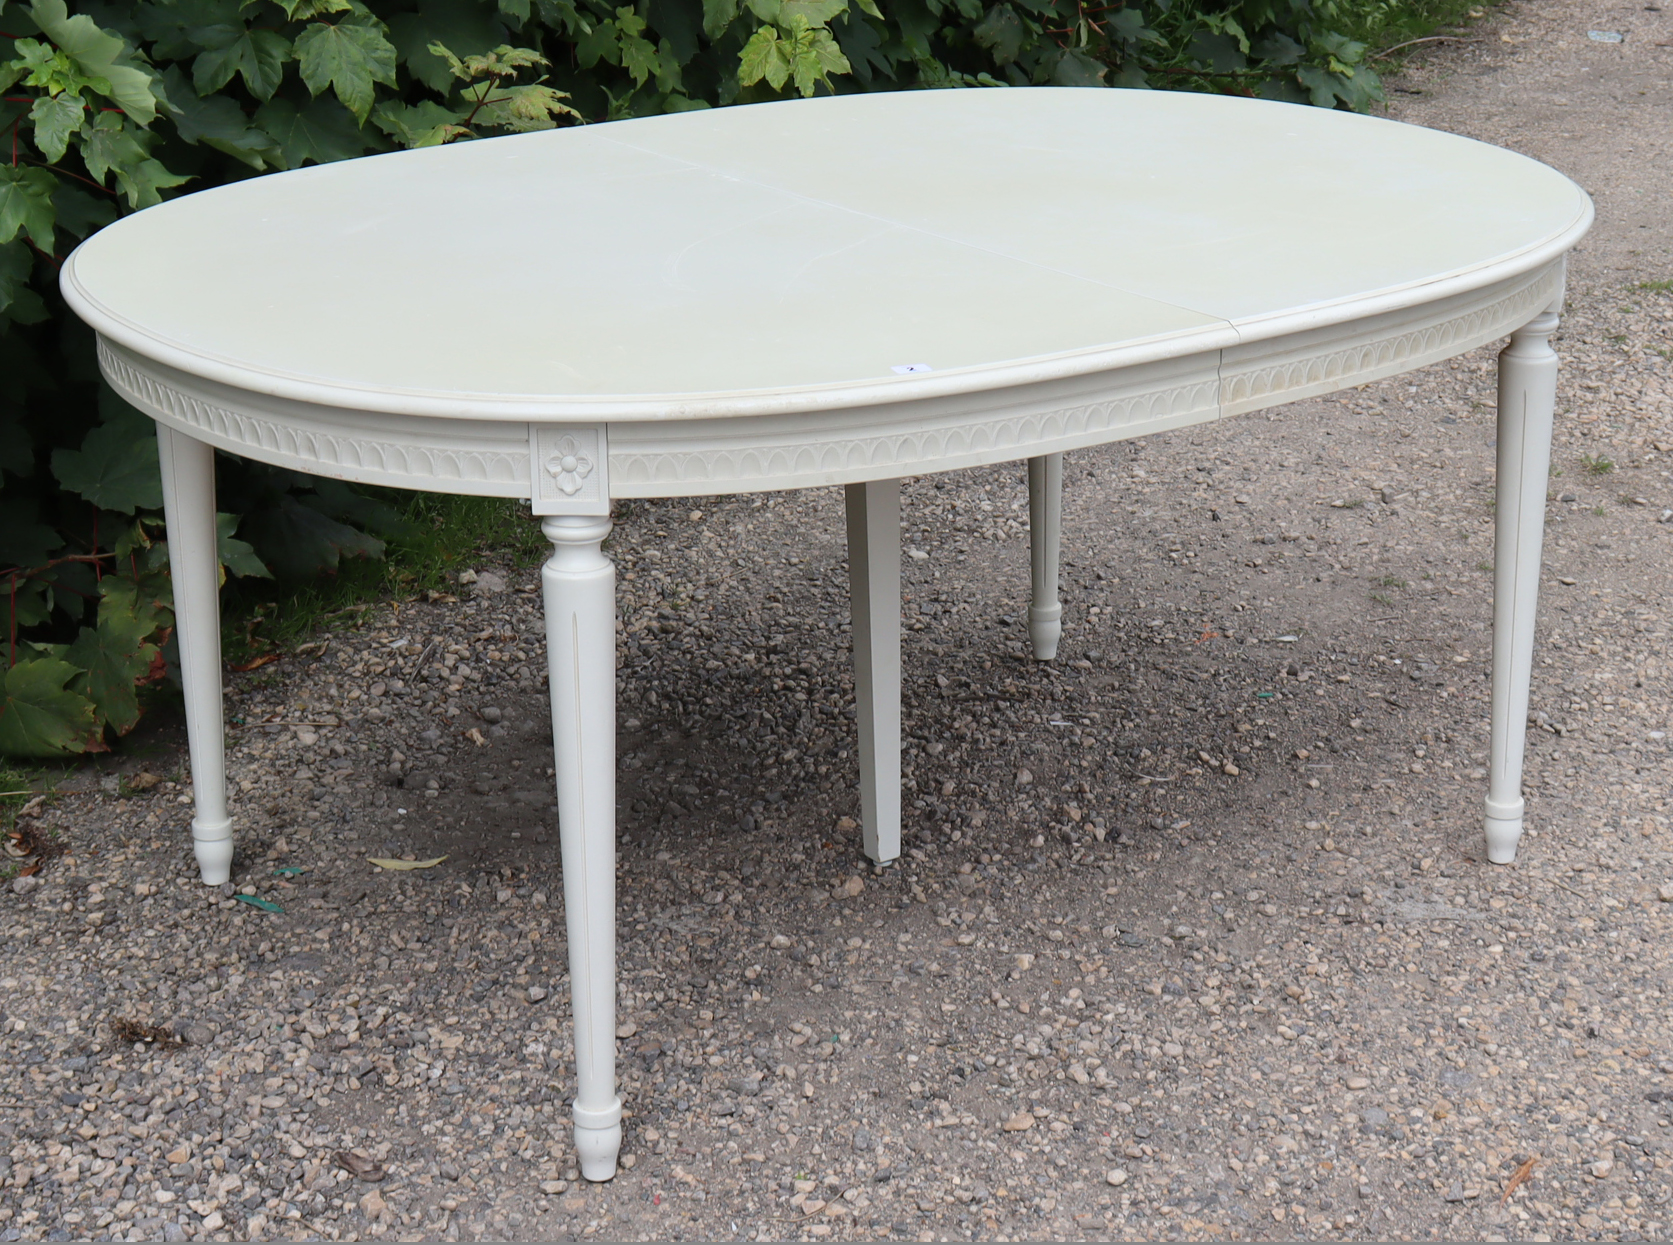 A GOOD QUALITY WHITE-FINISH EXTENDING DINING TABLE IN THE CONTINENTAL-STYLE with moulded edge to the